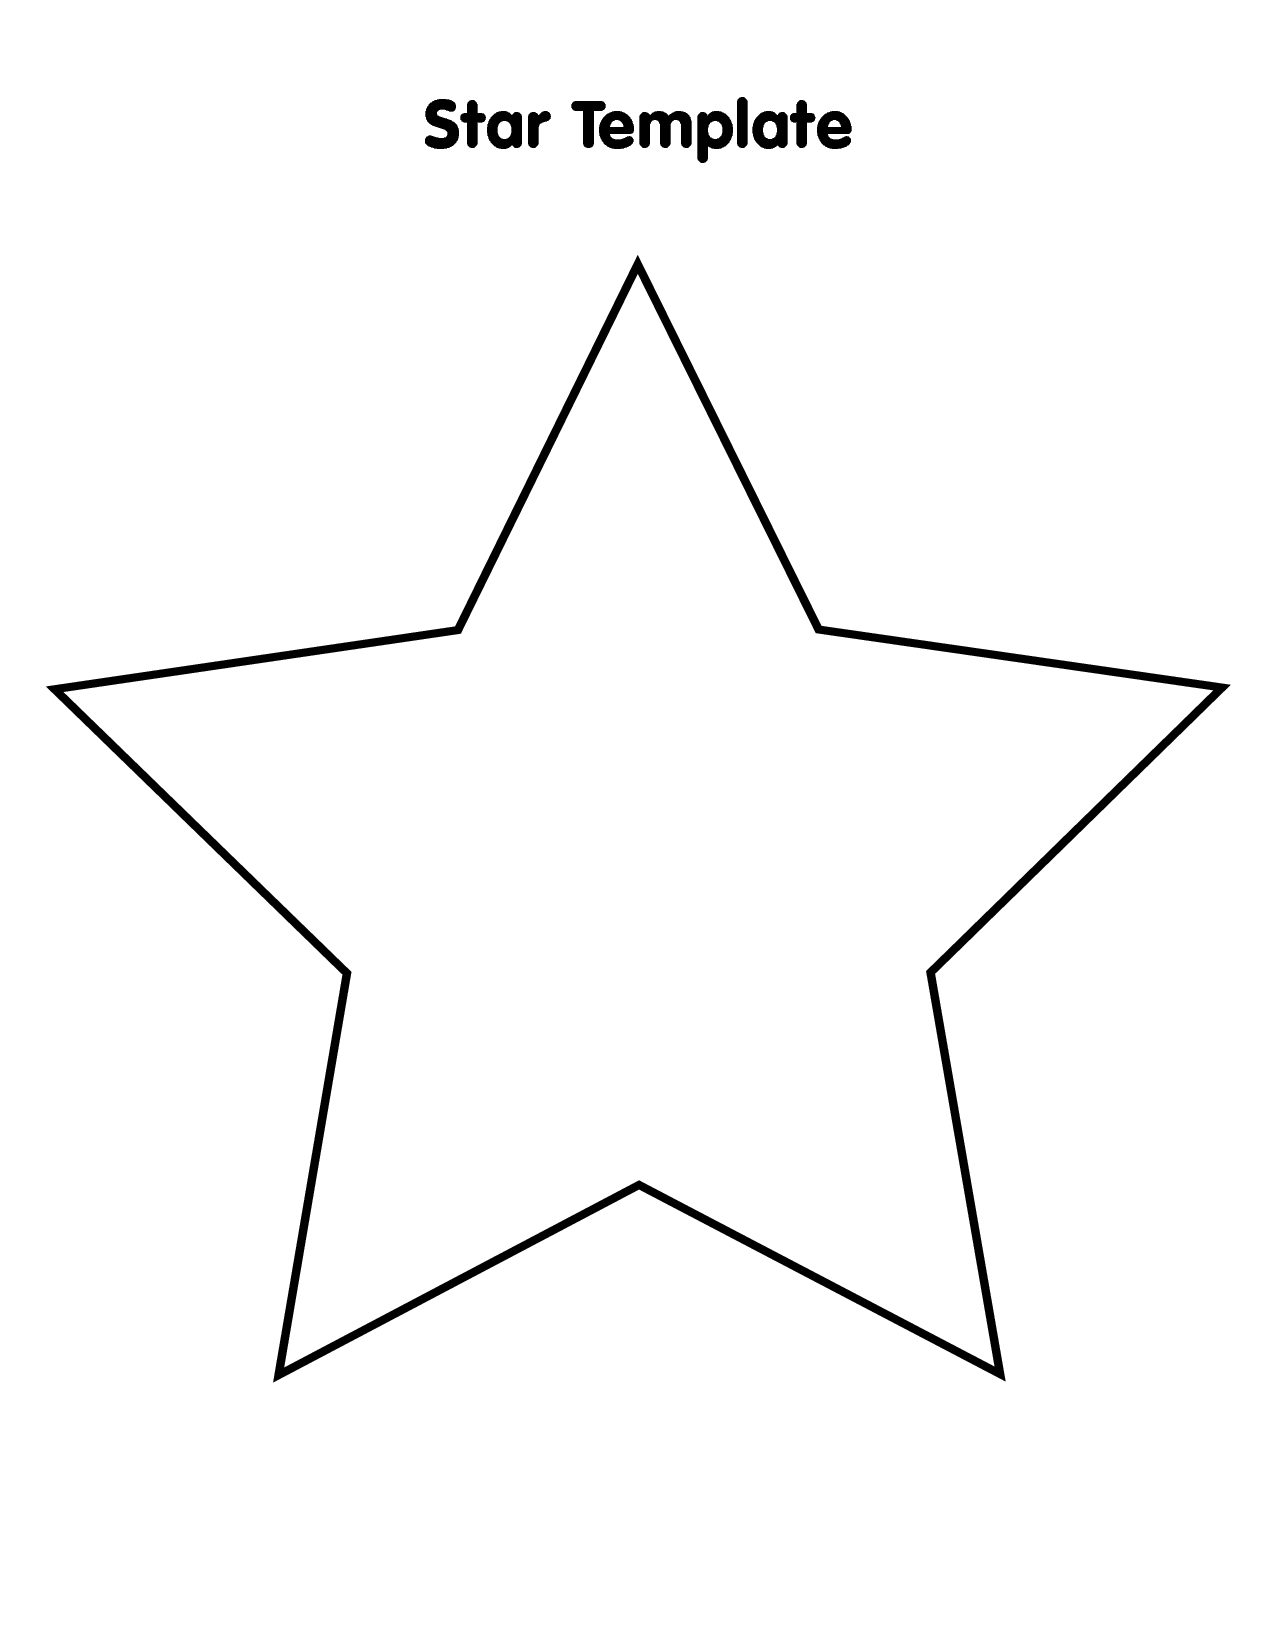 Images > Small Star Template